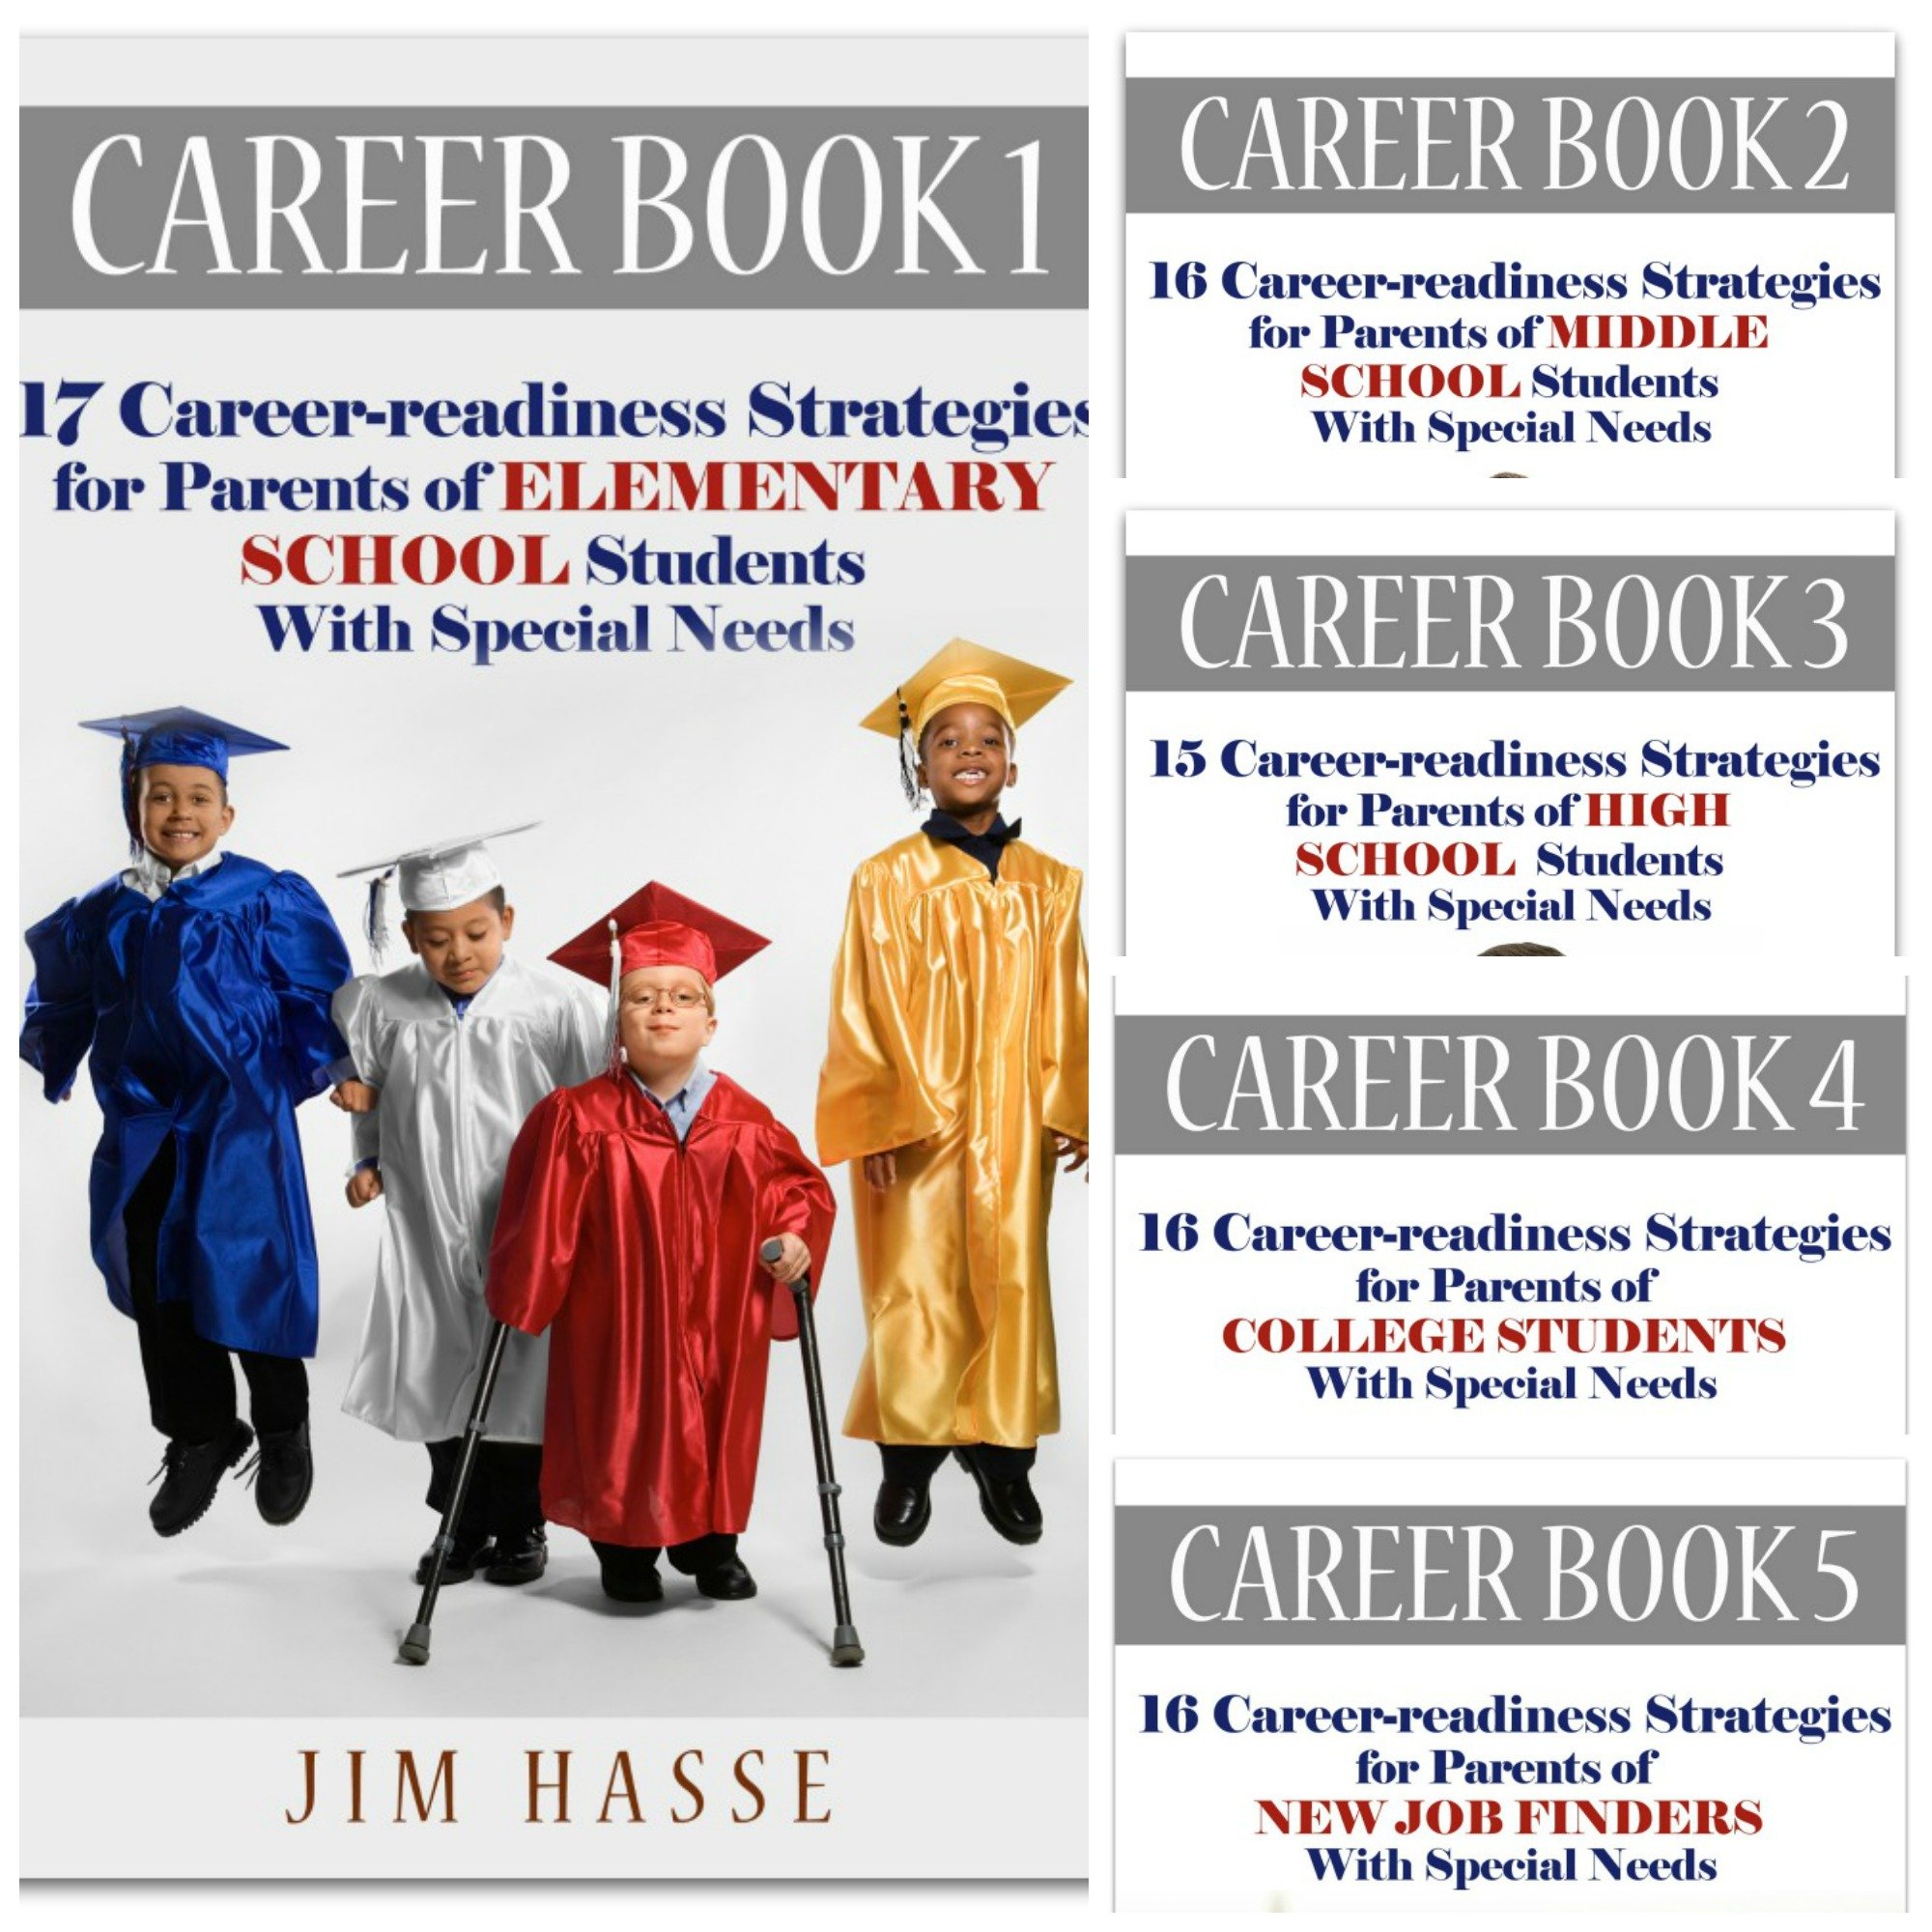 Cover of Career Book 1 showing 4 elementary school students in graduation cap and cowns -- one with crutches. Covers of other four Career Books are shown in a smaller sidebar